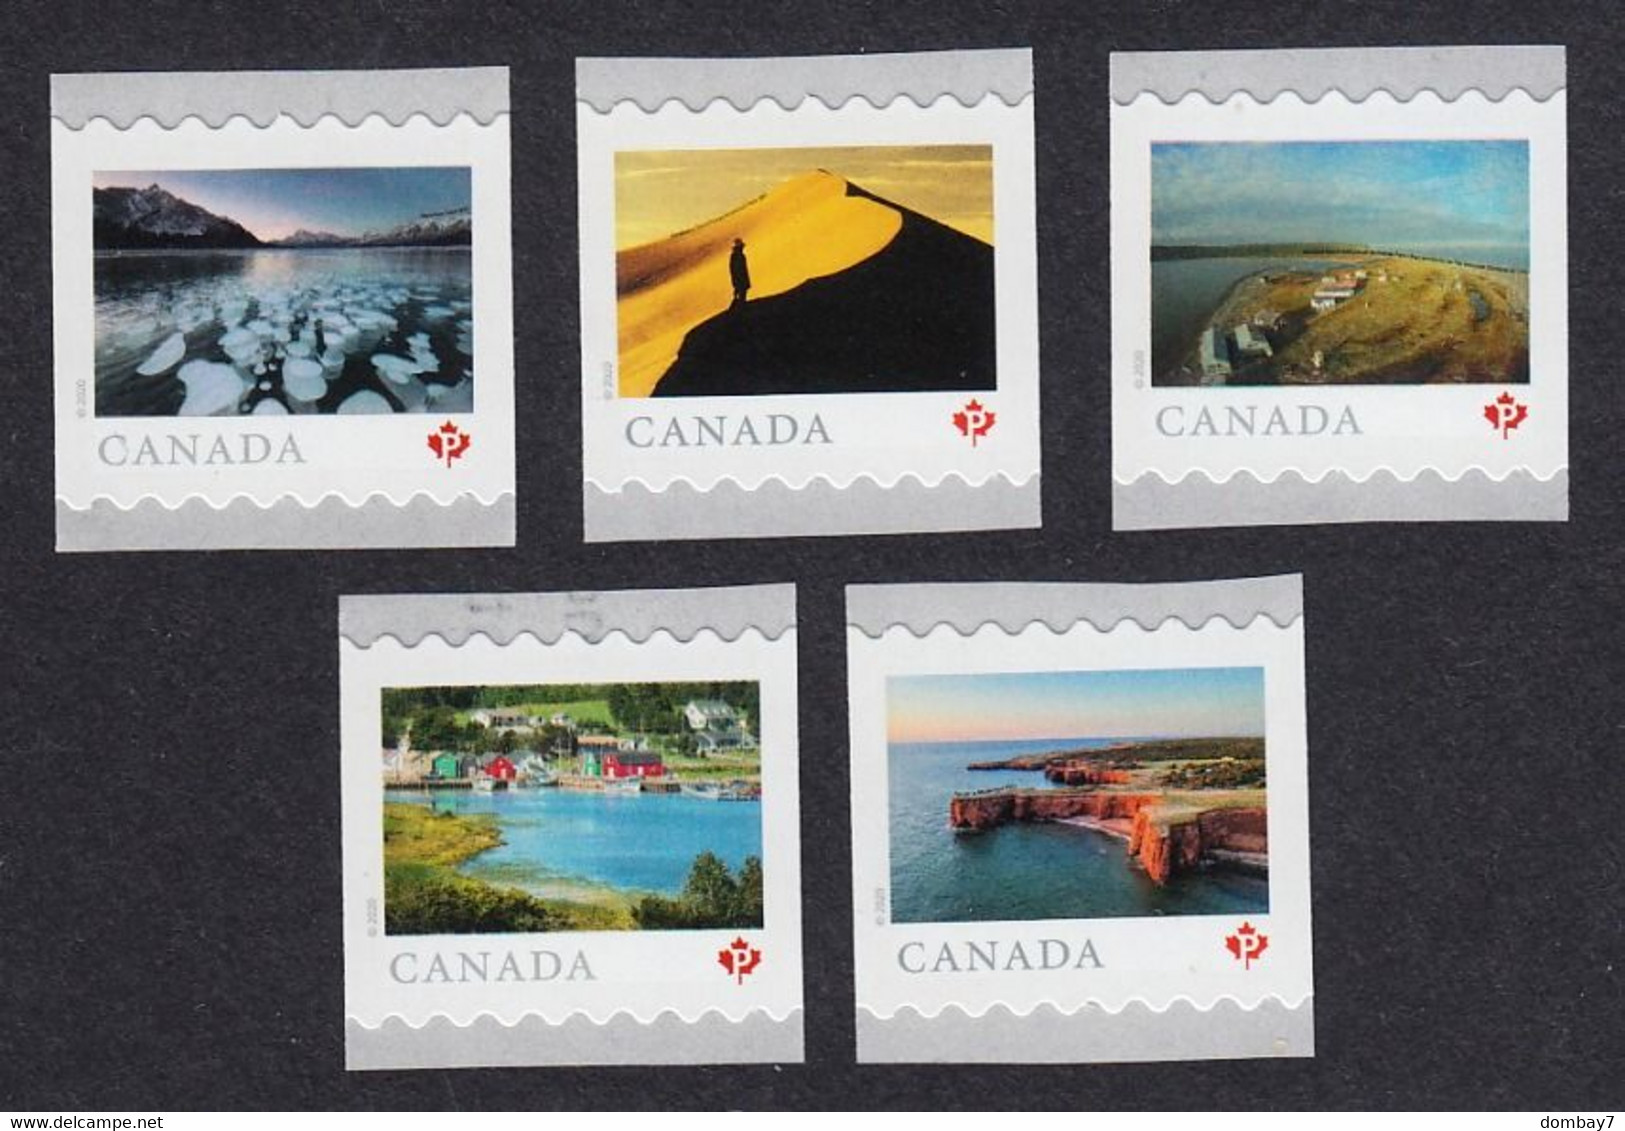 Qc. FROM FAR AND WIDE = Full Set Of 5 Stamps Cut From COIL / ROLL = MNH Canada 2020 Sc #3212-3216 - Ongebruikt